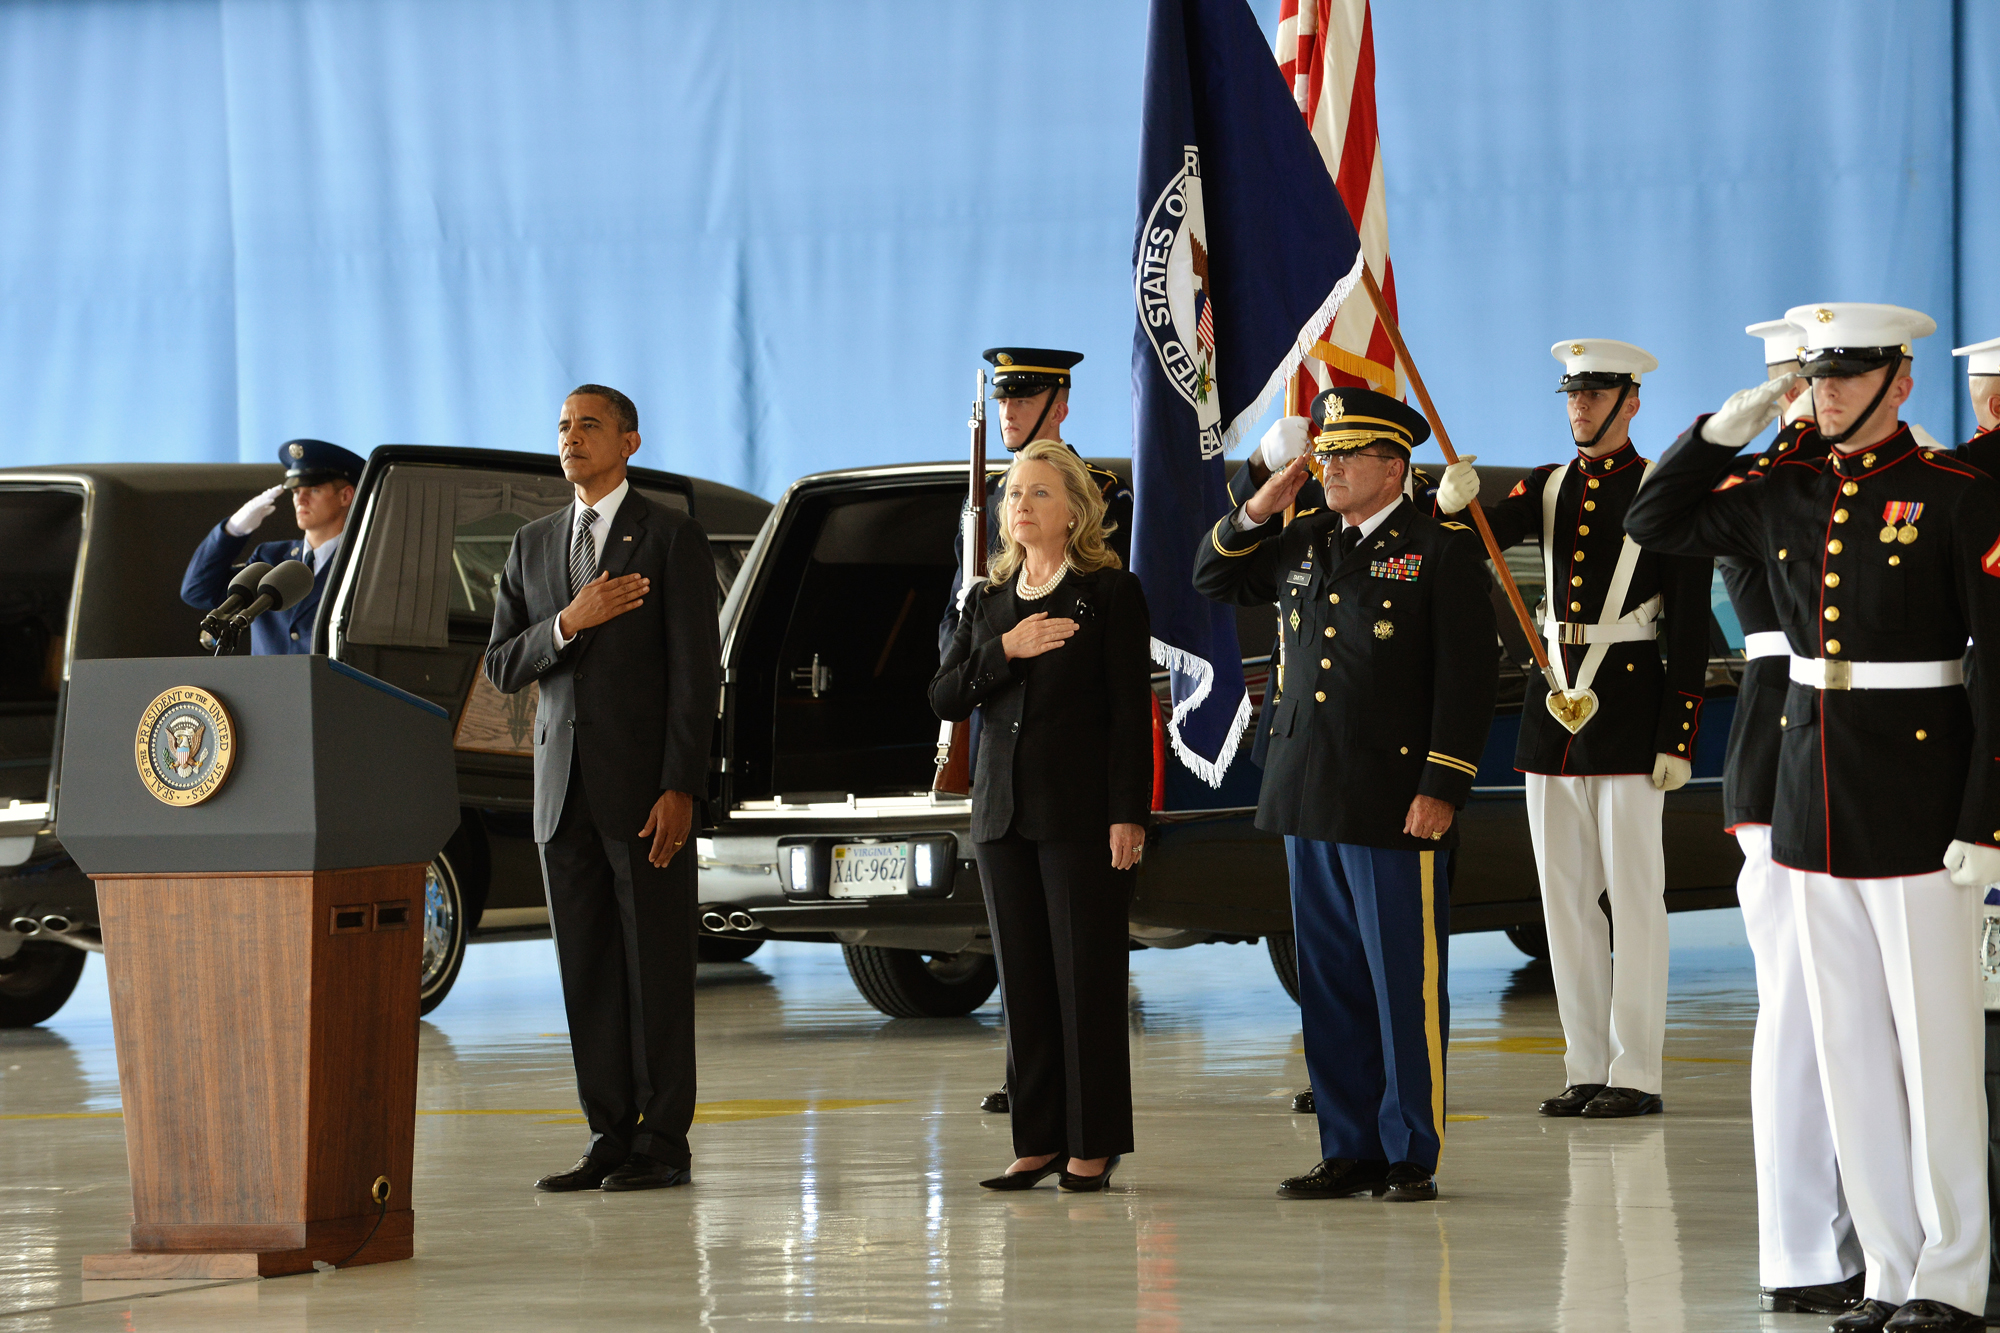 President Obama and Secretary Clinton honor the Benghazi attack victims at the Transfer of Remains Ceremony held at Andrews Air Force Base on September 14, 2012.